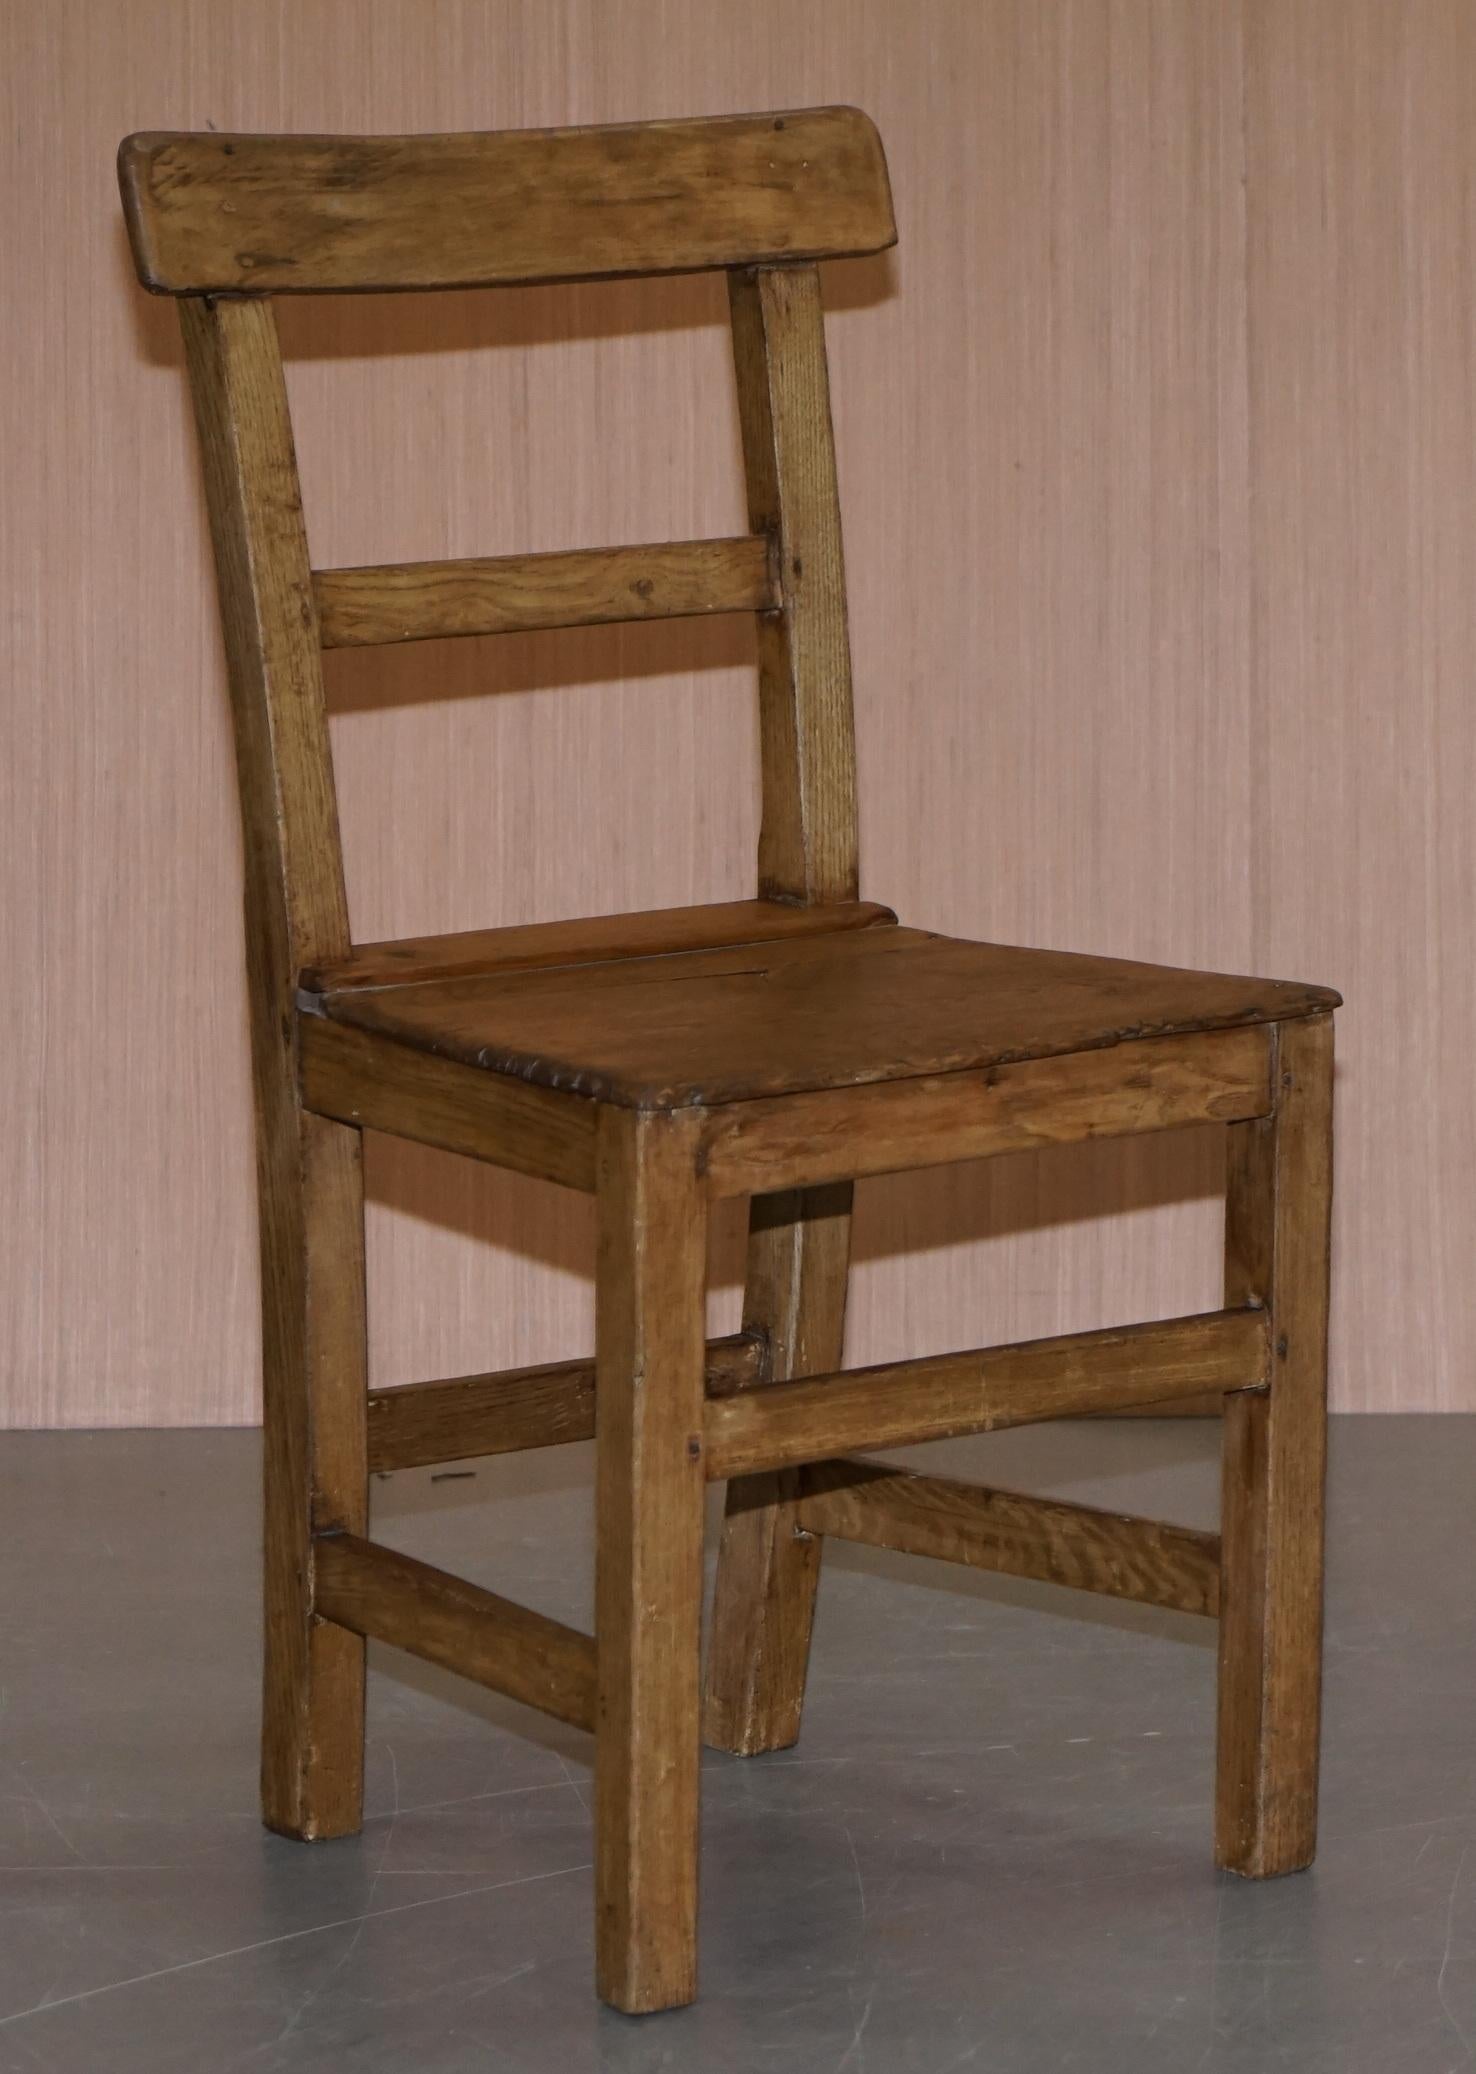 We are delighted to offer for sale this lovely set of six original Victorian farmhouse country chapel dining chairs.

They are made from elm and oak, they are very old and have tonnes of patina marks all-over which make them look and feel simply